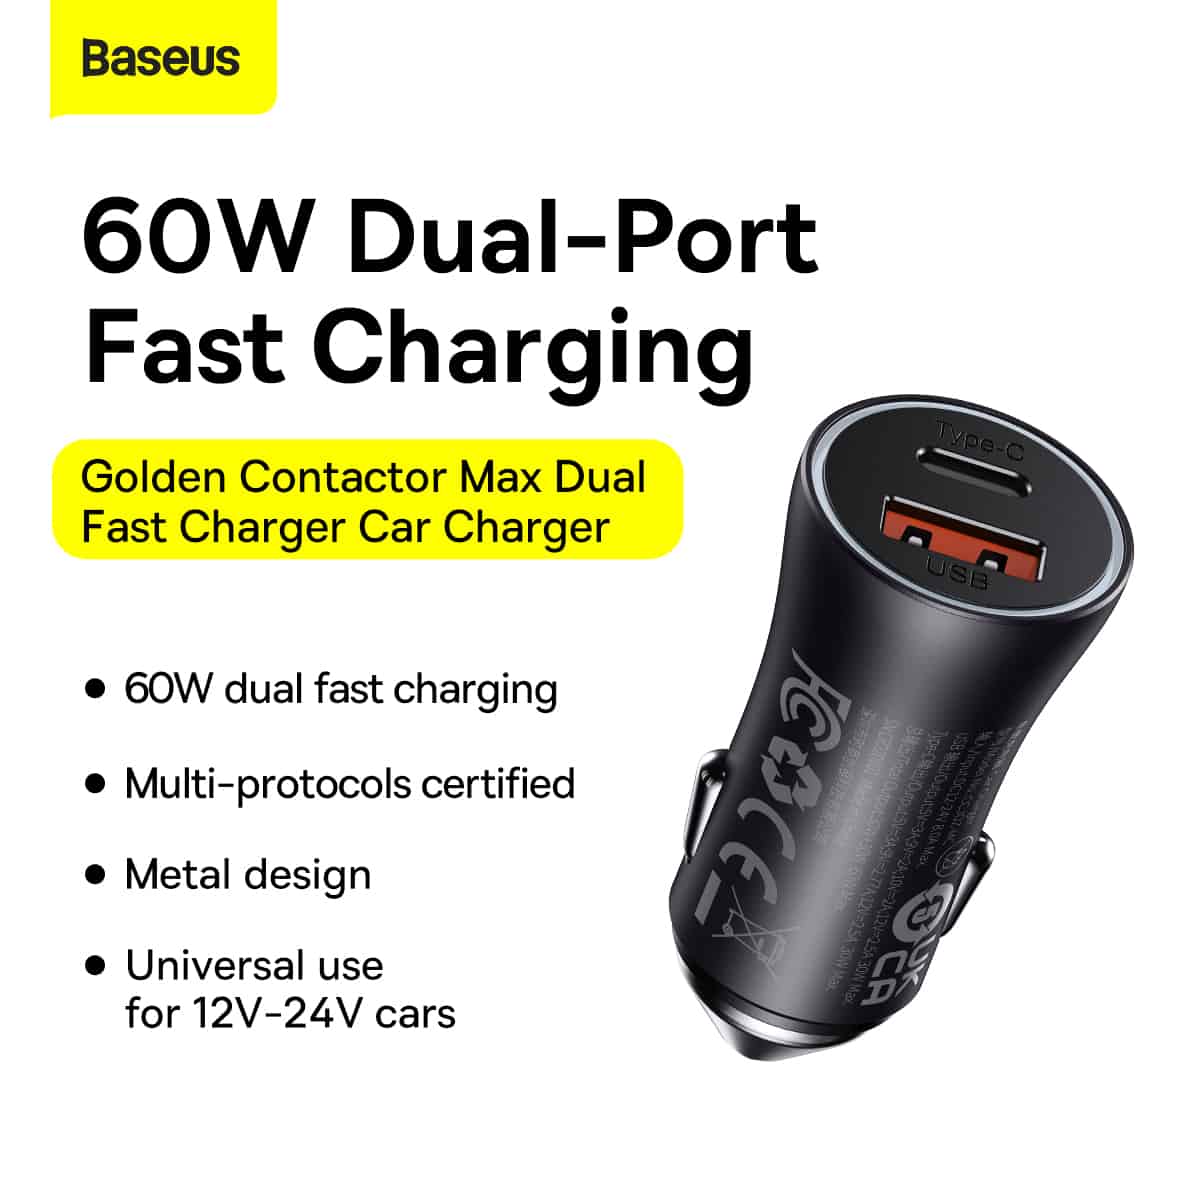 Baseus Golden Contactor Max UC 60W Dual Fast Charger Car Charger 5